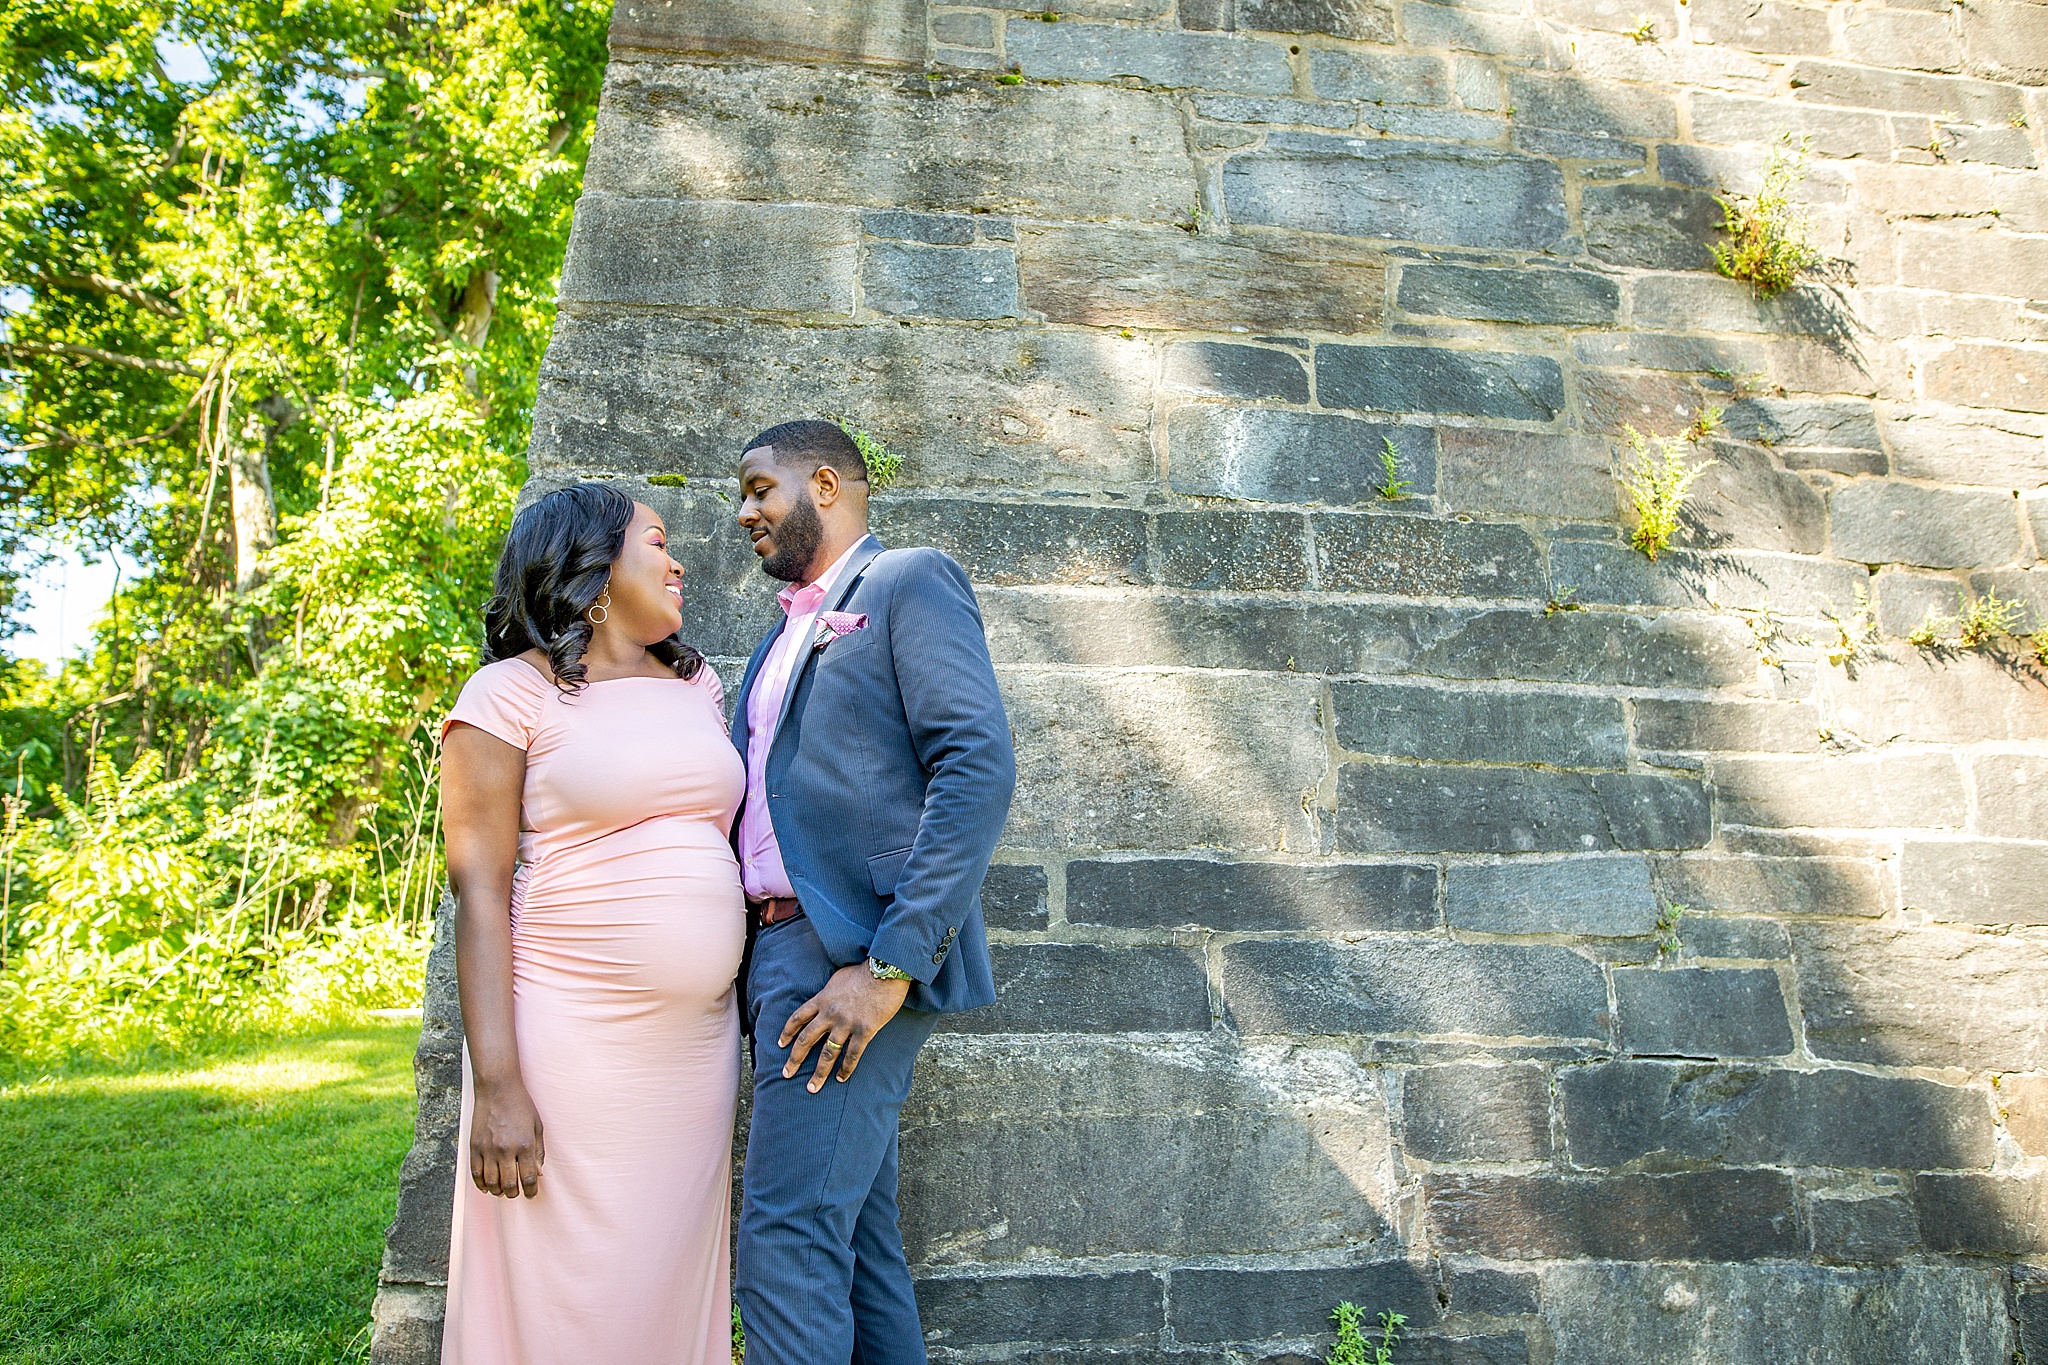 Damien-carter-photography-ft-washington-state-park-maternity-session-against-wall